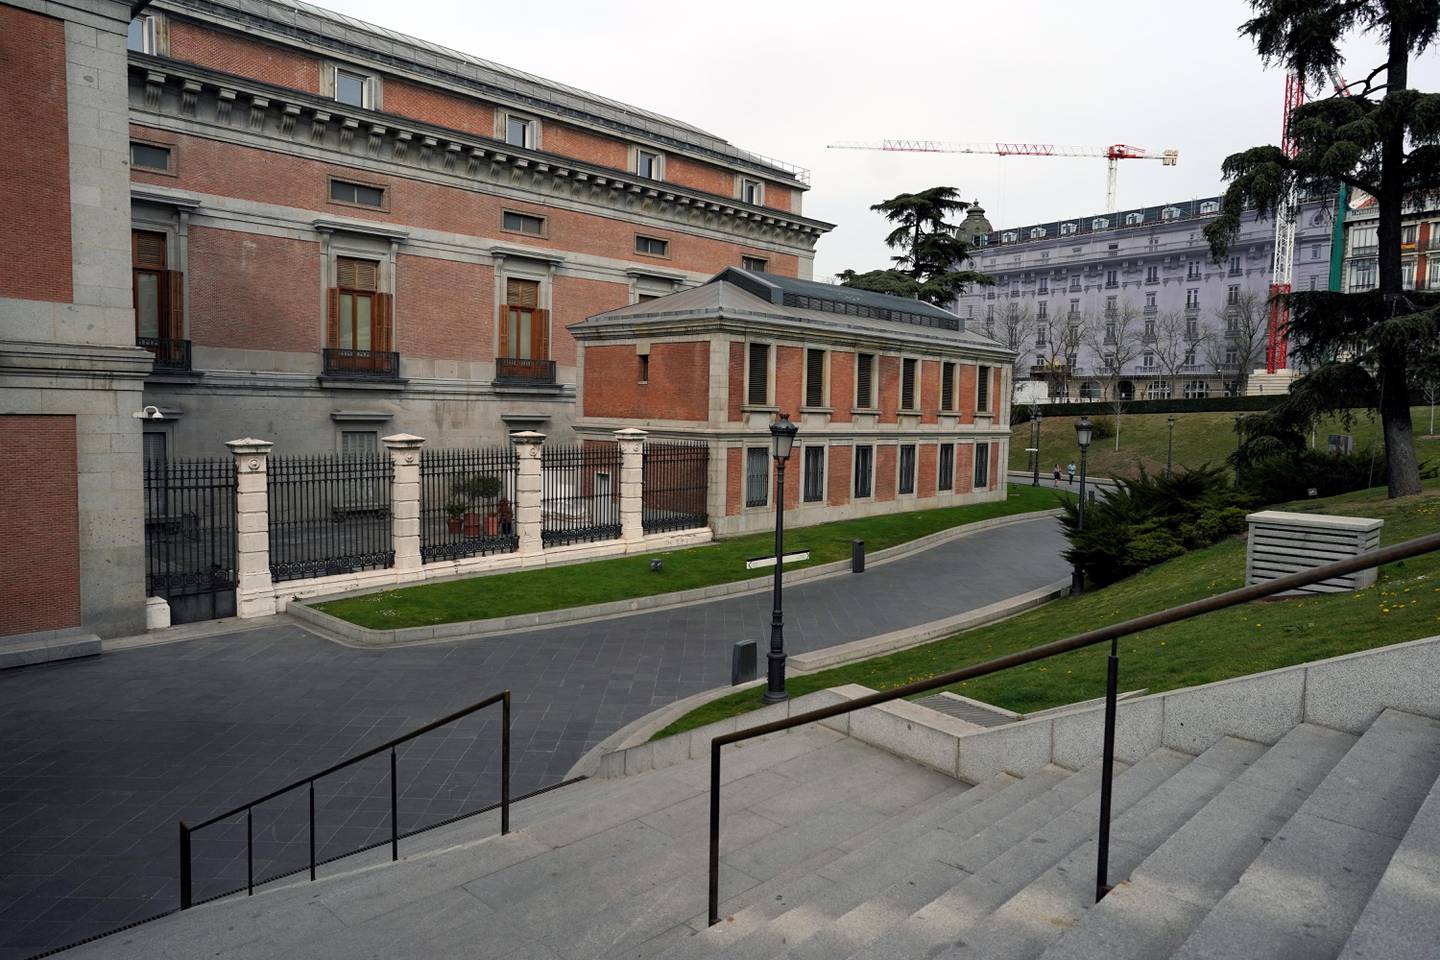 General view of El Prado museum, as all of Madrid's state-run museums, including the Prado, the Reina Sofia and the Thyssen-Bornemisza, are closed to the public due to the coronavirus outbreak that hit the Spanish capital, in Madrid, Spain, March 12, 2020. REUTERS/Juan Medina